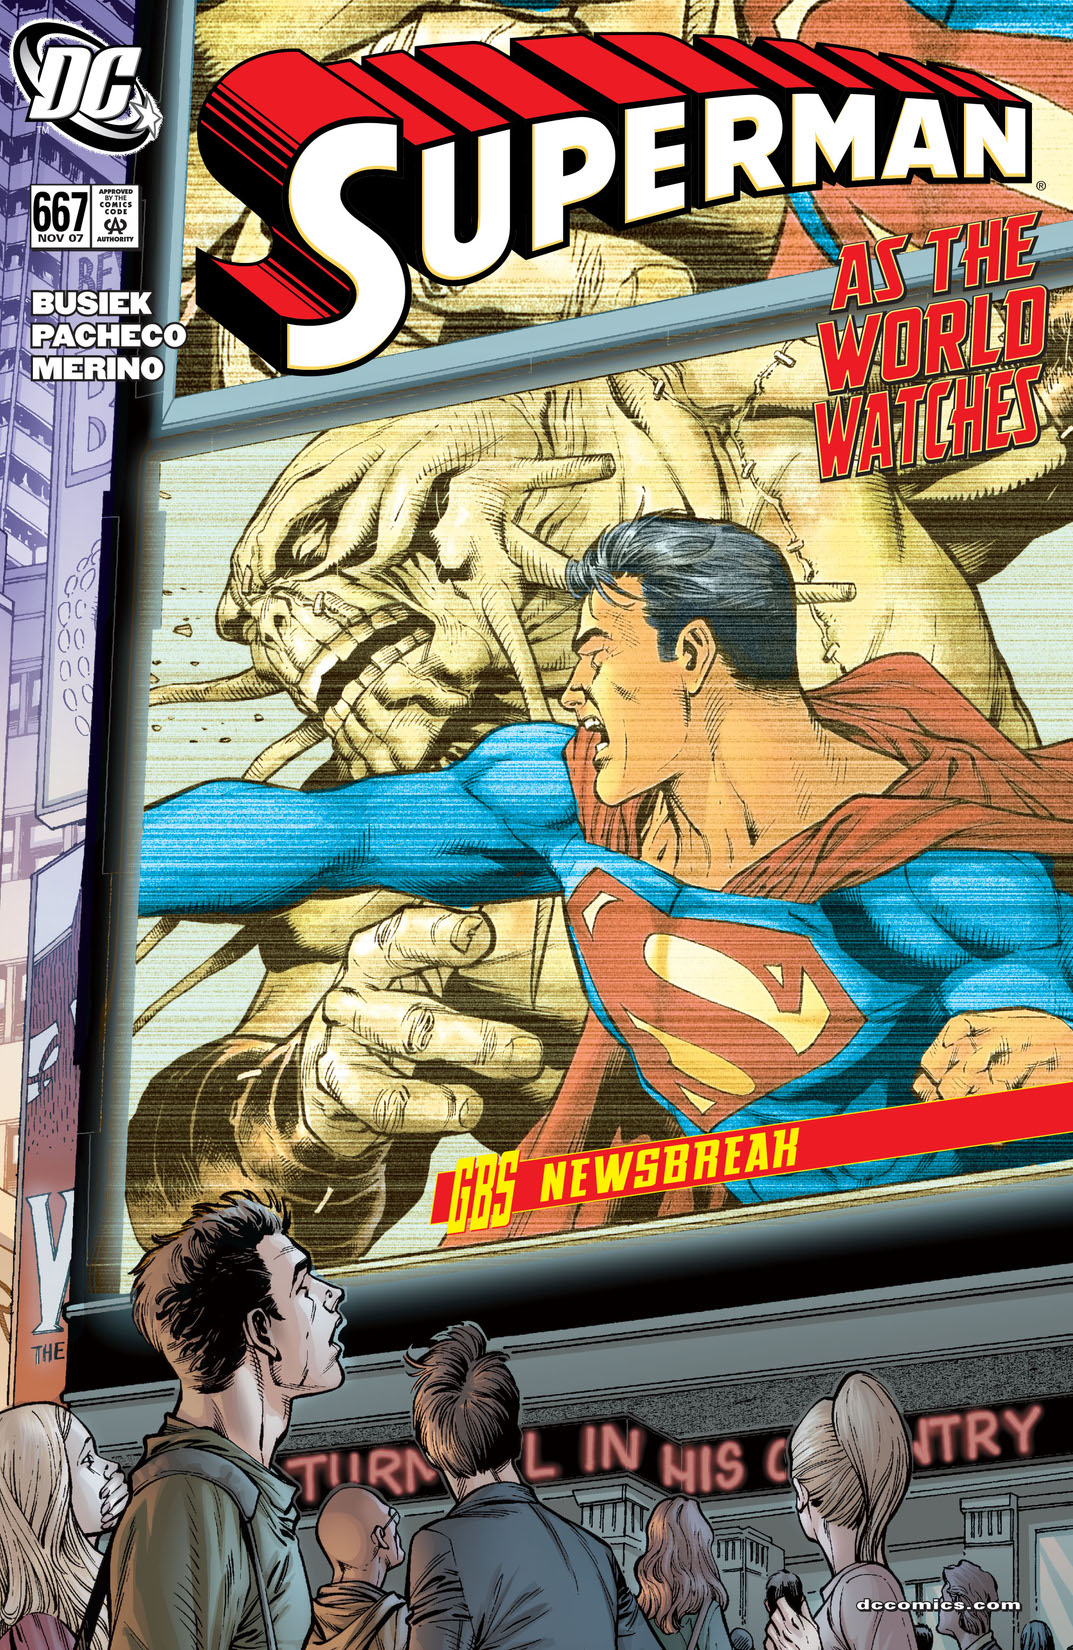 Superman (2006-) #667 preview images